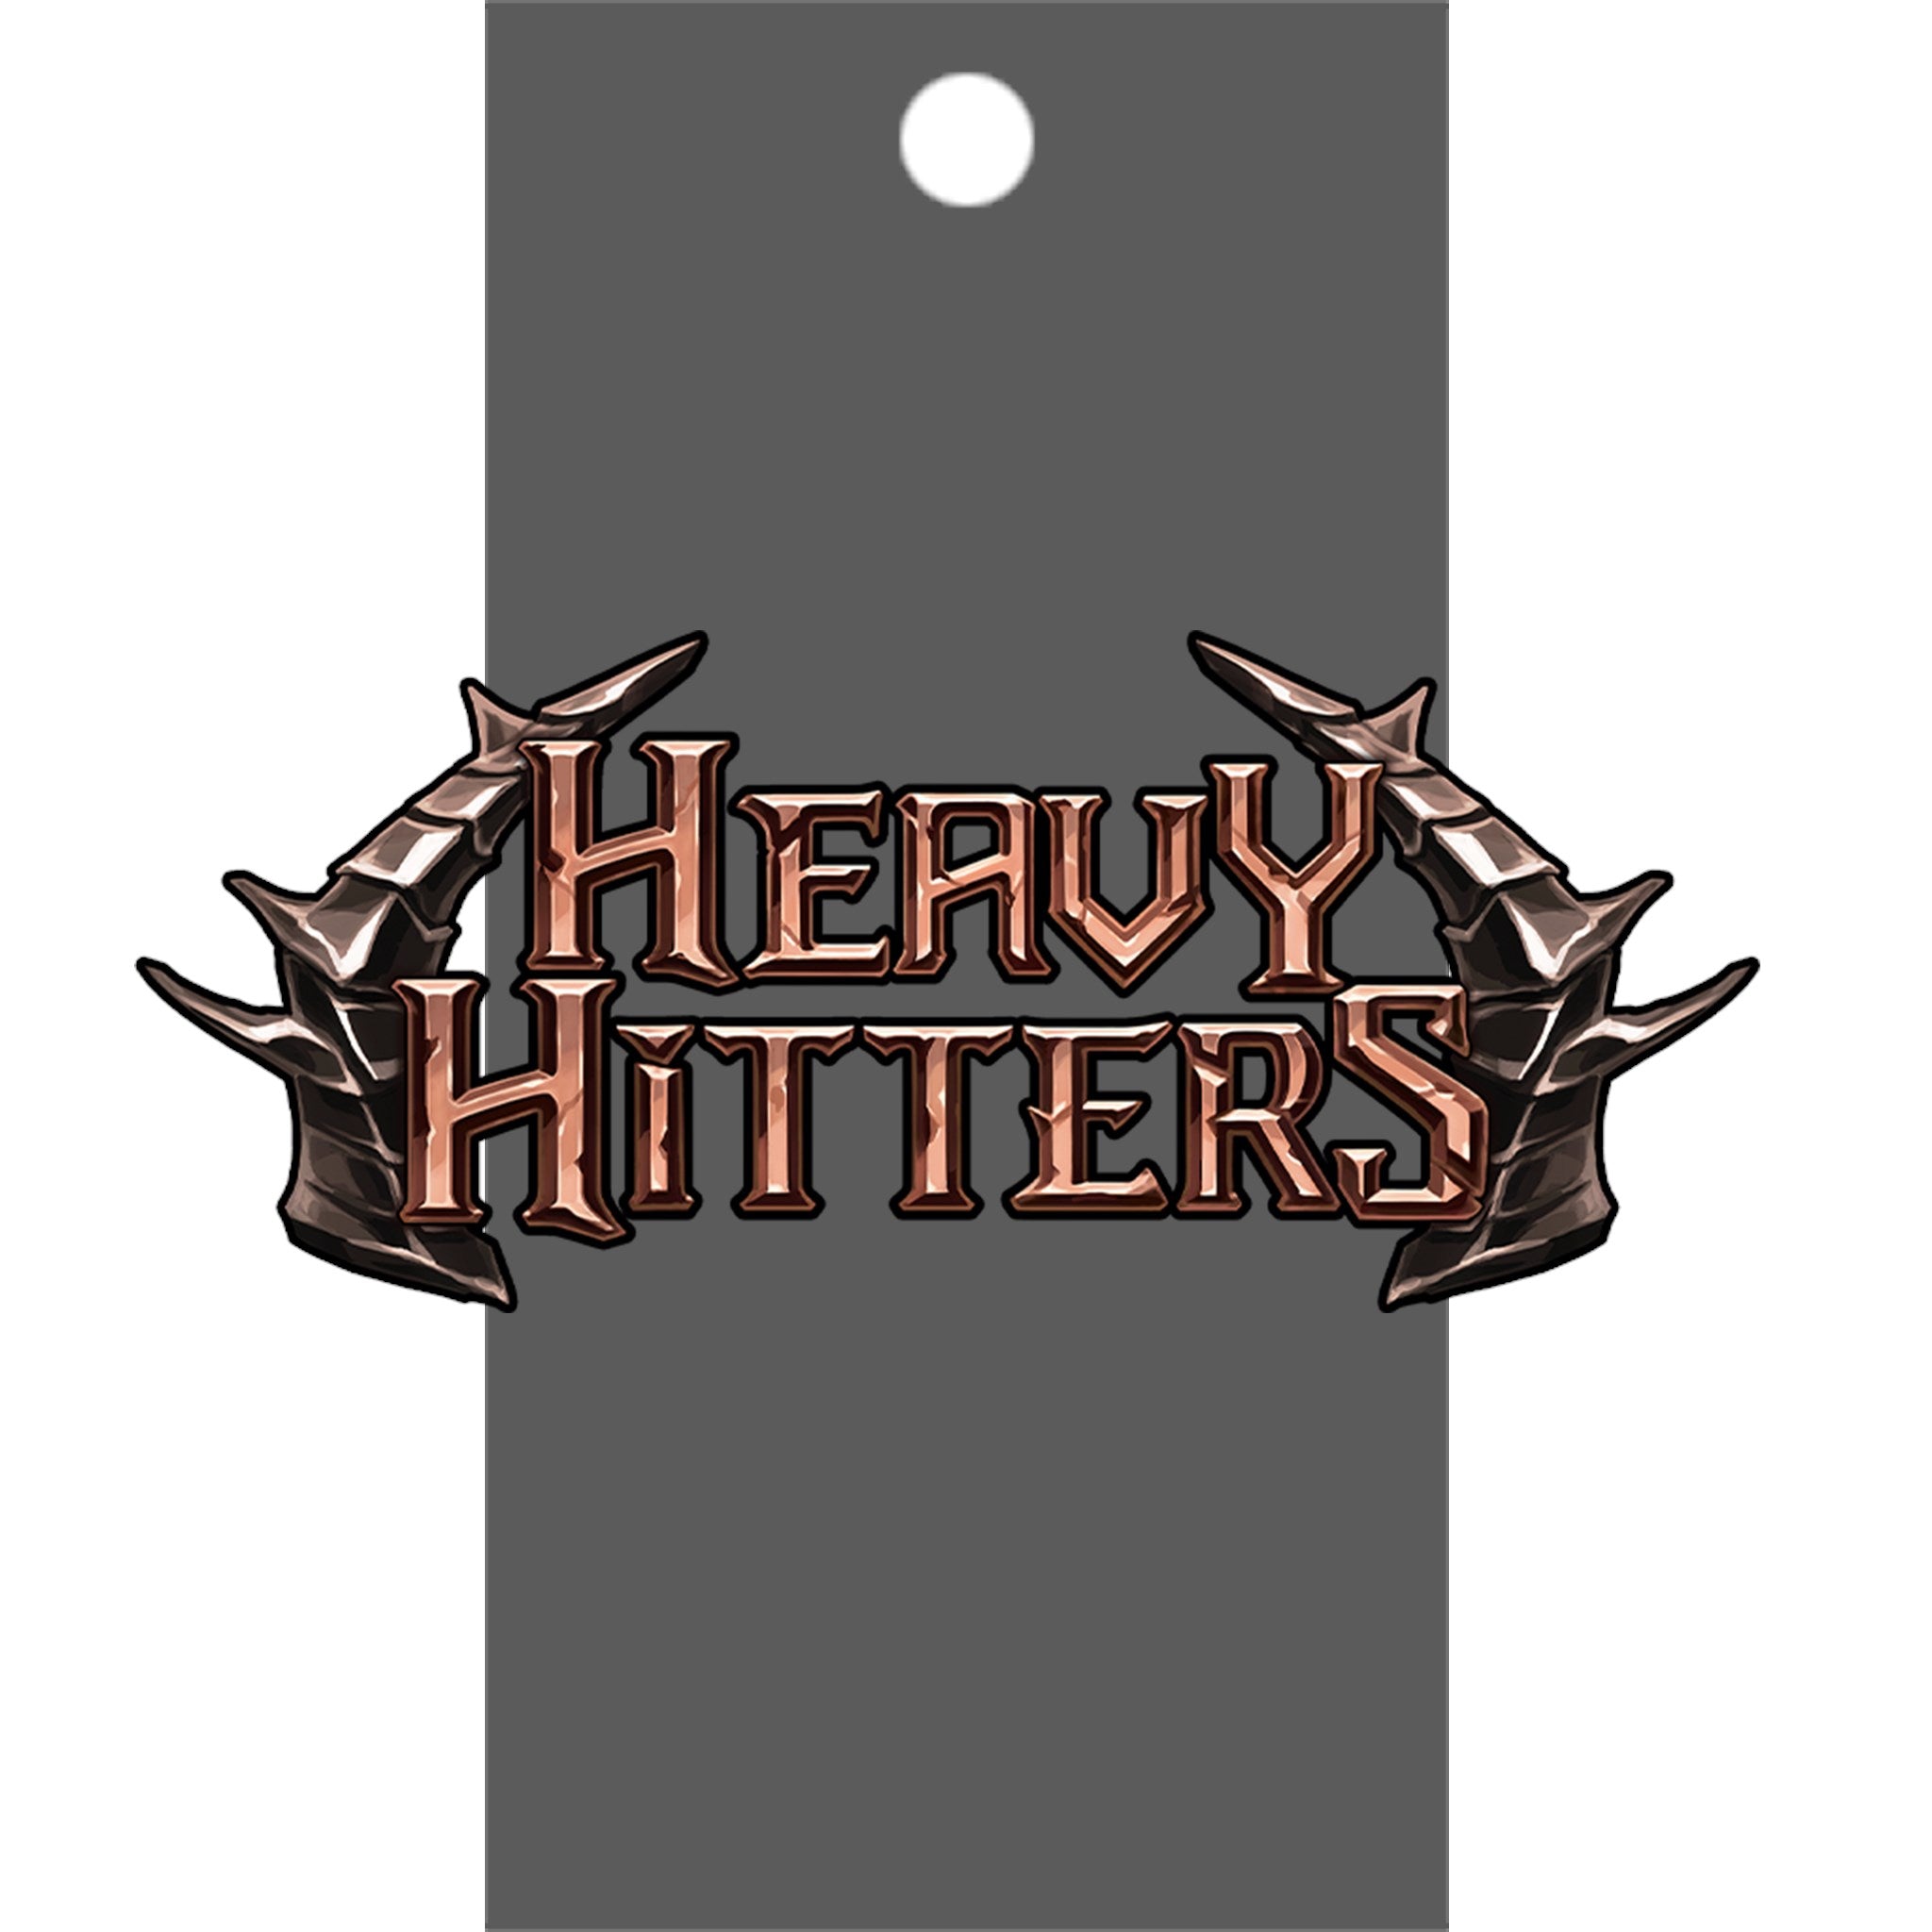 Heavy Hitters - Booster Pack